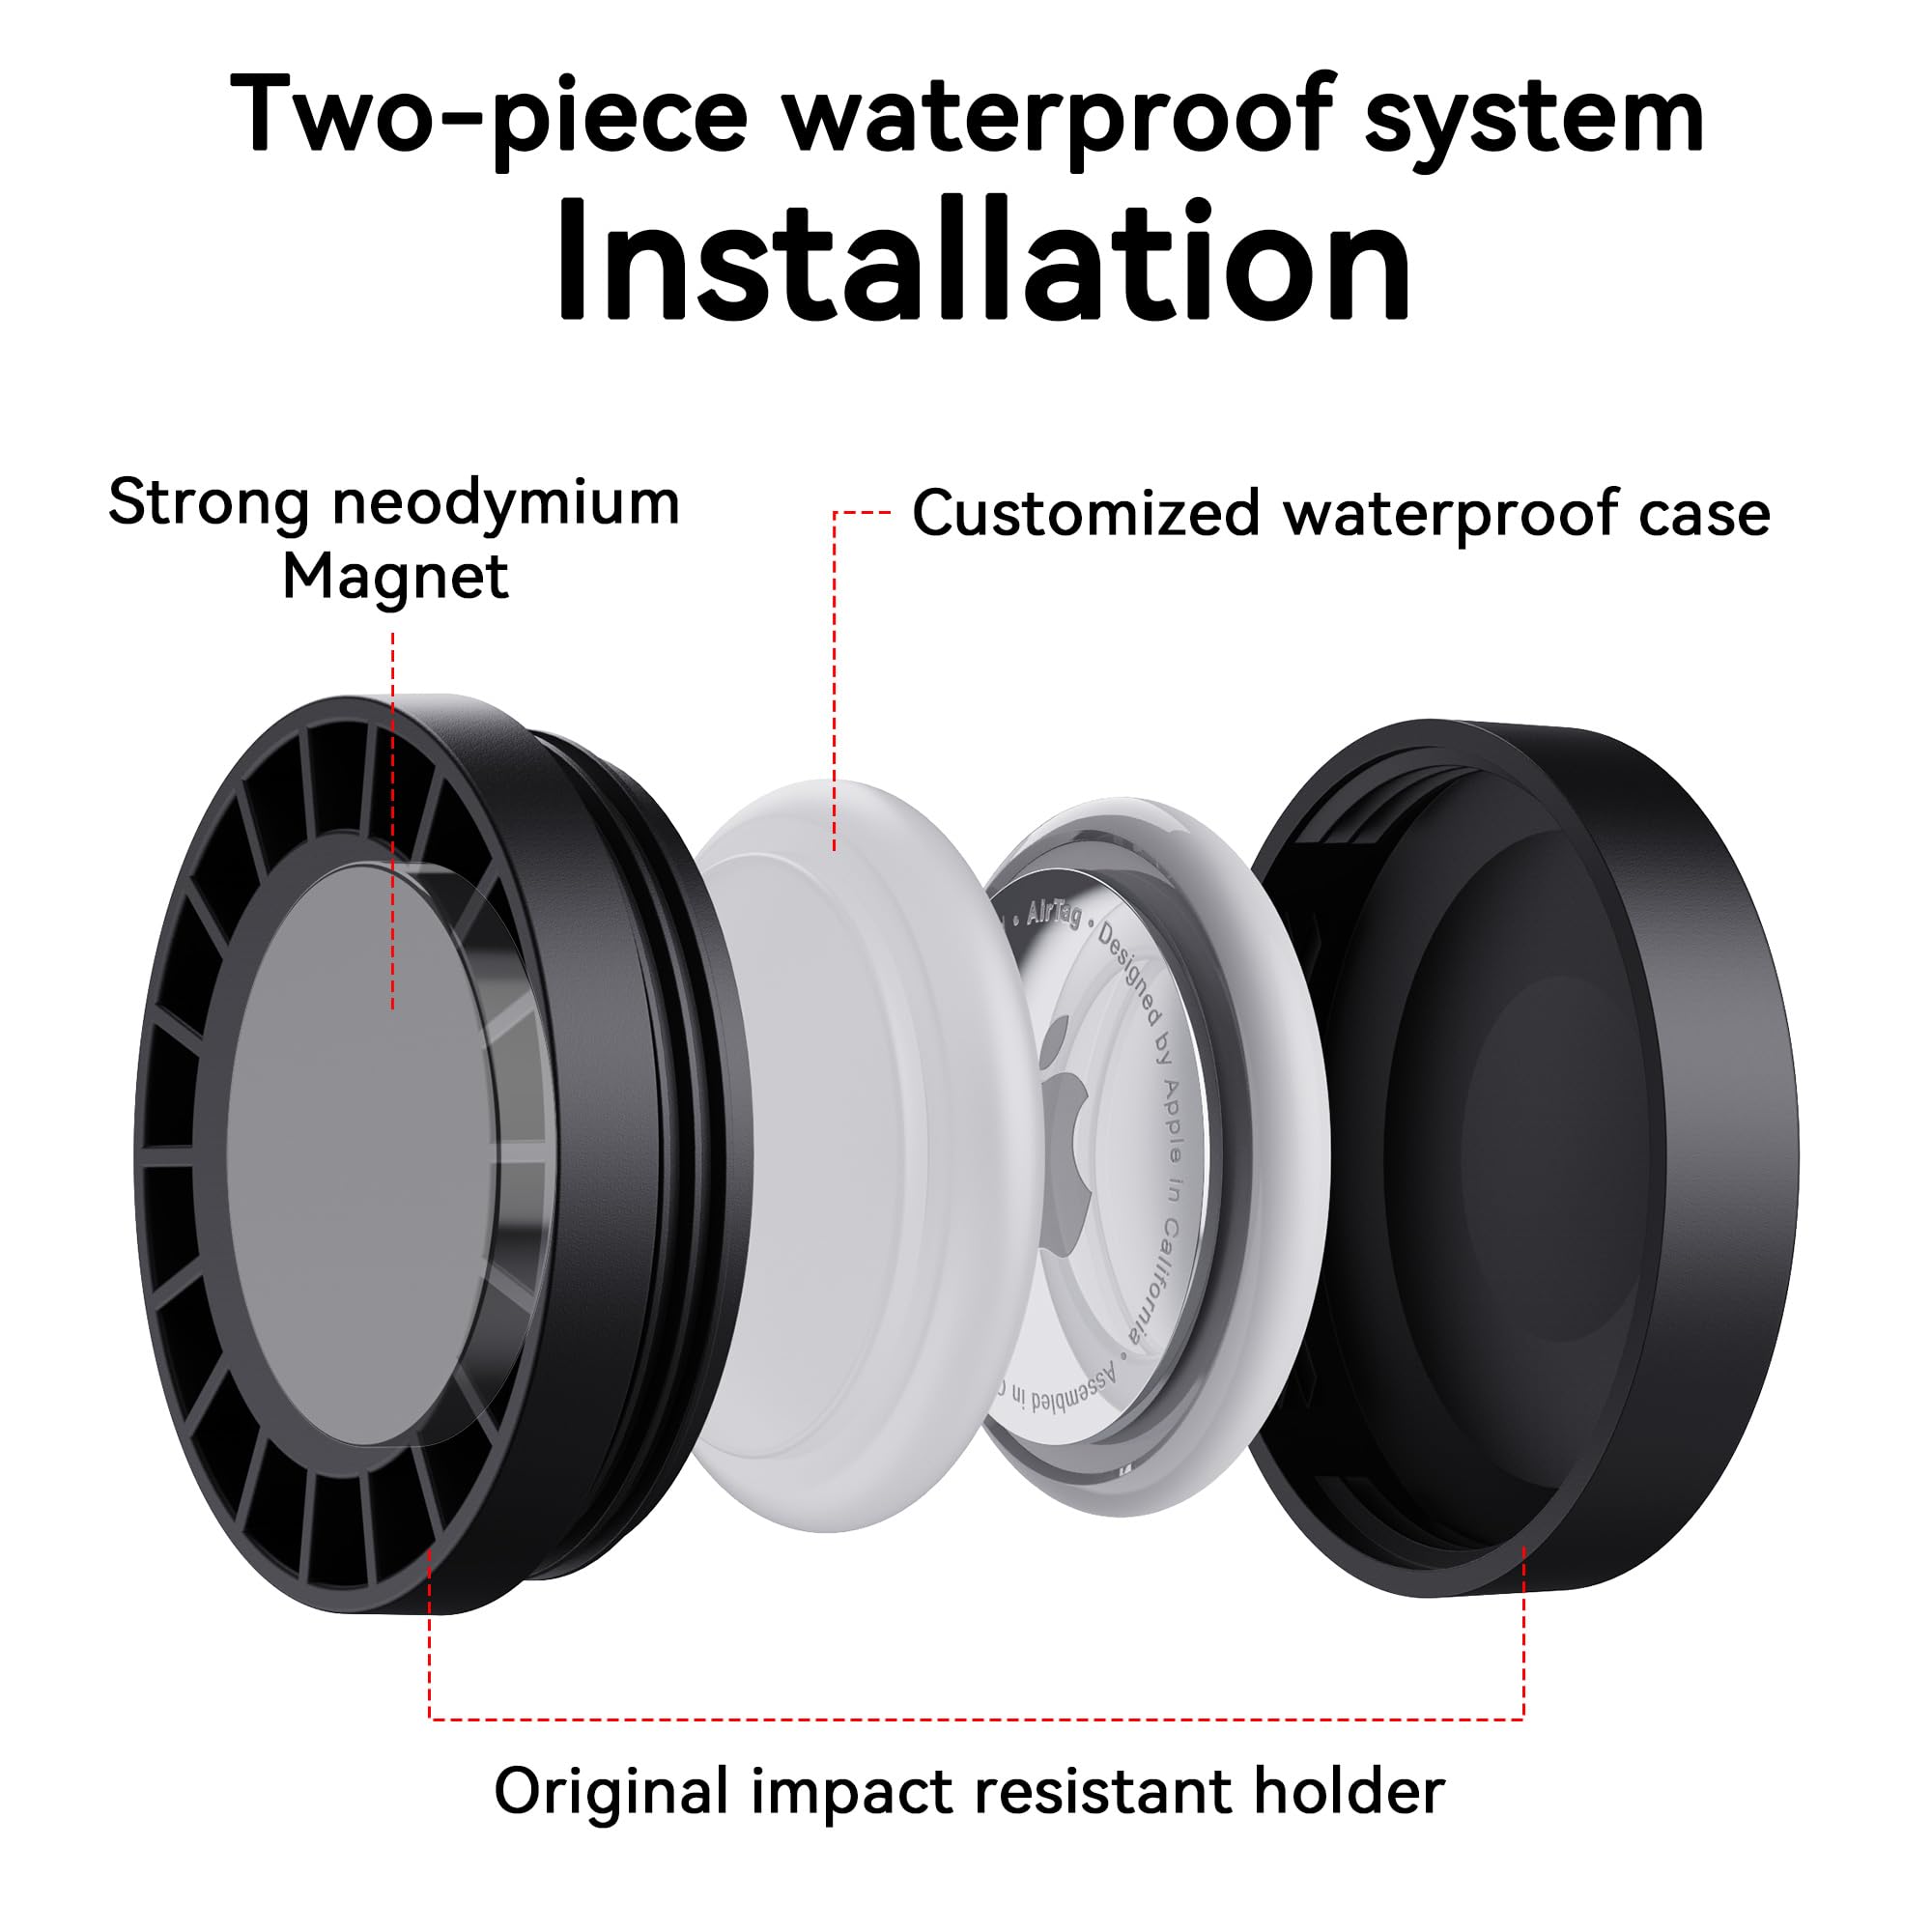 2 Pack Magnet AirTag Holder,IPX8 Waterproof Case AirTag sticker bike Mount,Compatible with Apple AirTag丨Strong Neodymium Magnet,Easy Installation for Car,Utility Trailer,Bike,Metal Surfaces etc.